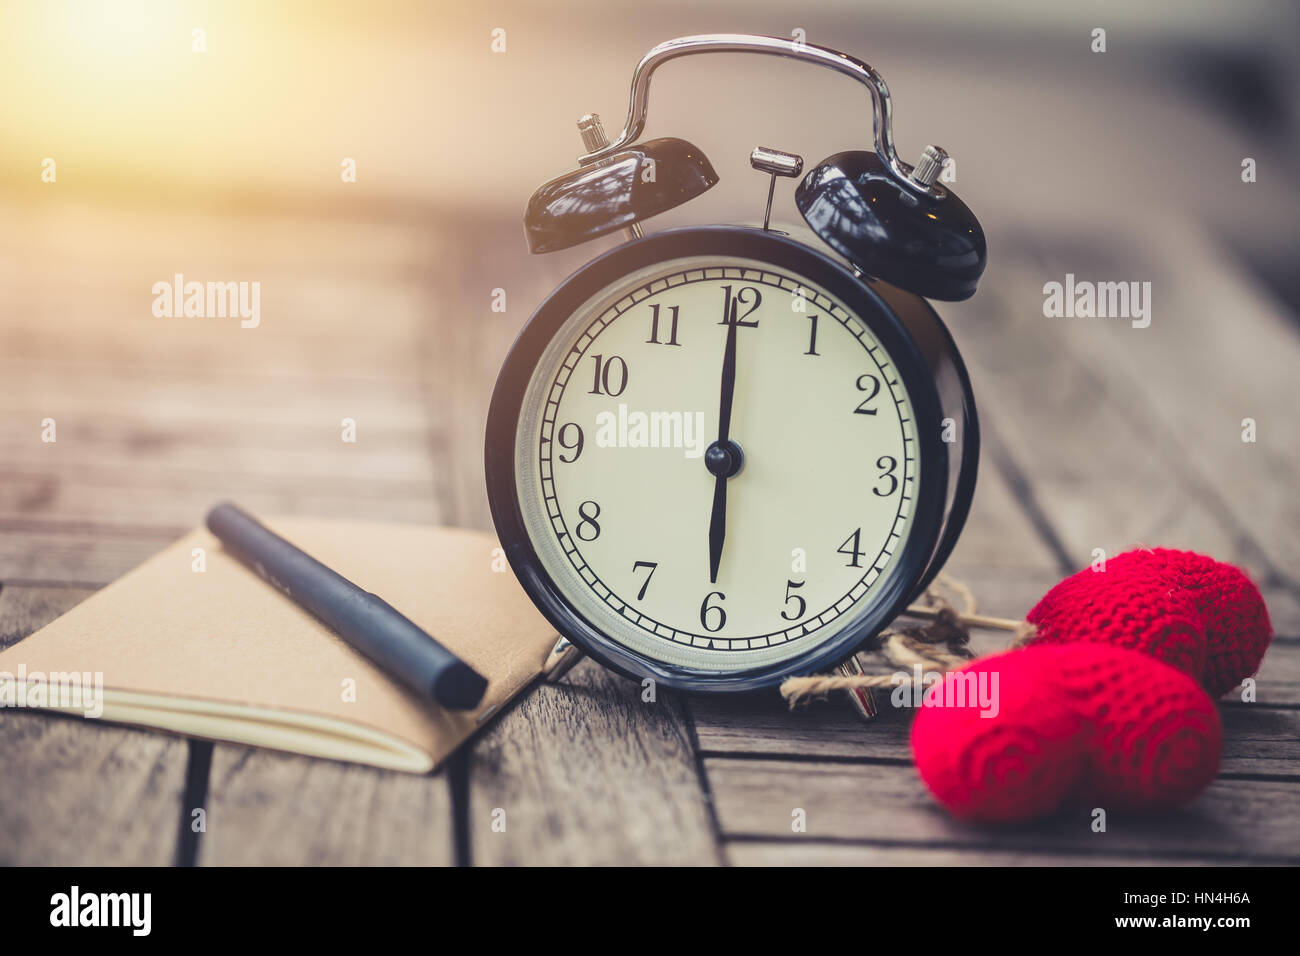 retro clock time at 6 o'clock with notebook or memo on wood table, times of love memory writing diary concept vintage color tone. Stock Photo